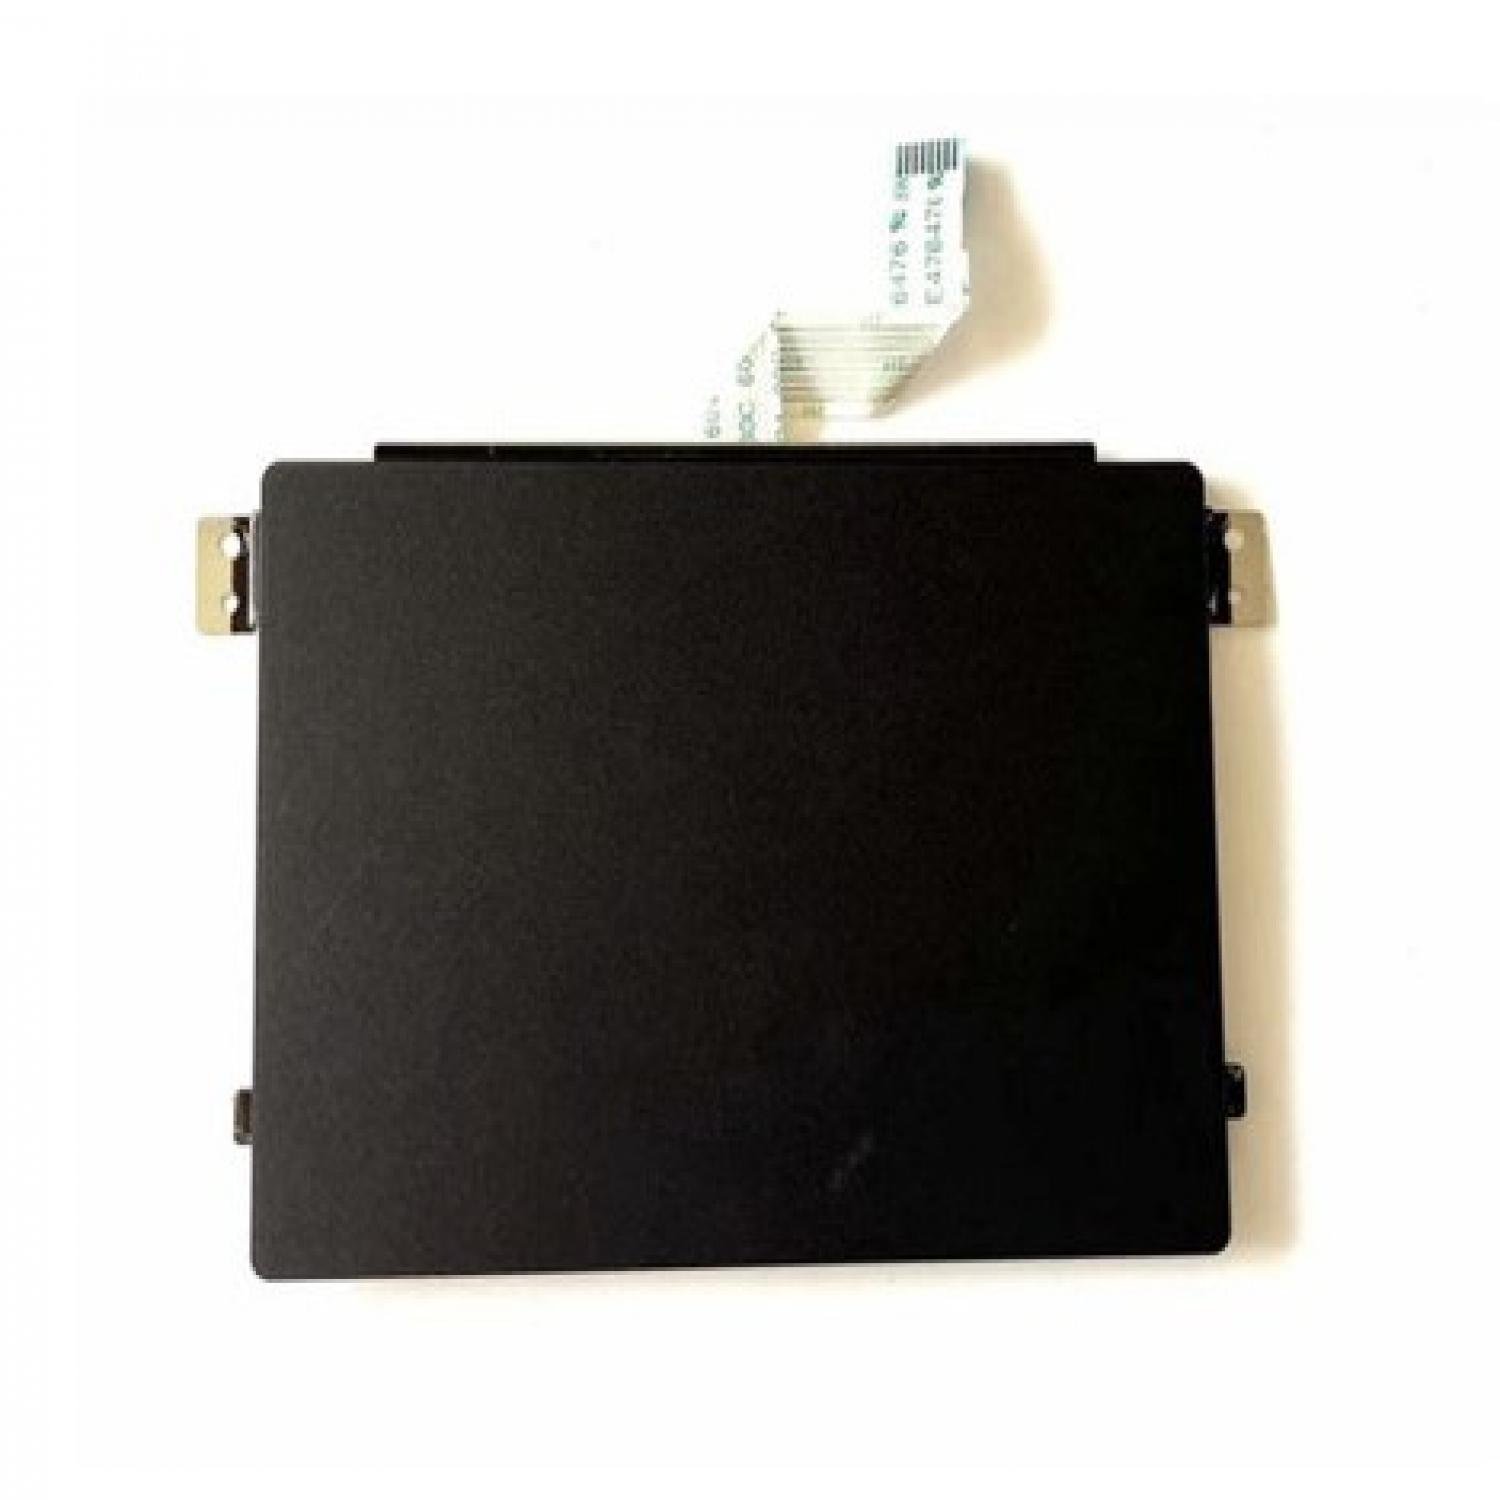 Dell Inspiron 5402 Vostro 5402 OEM Touchpad Trackpad Logic Card Sensor Module With Cable P/N KC7T0, 0KC7T0